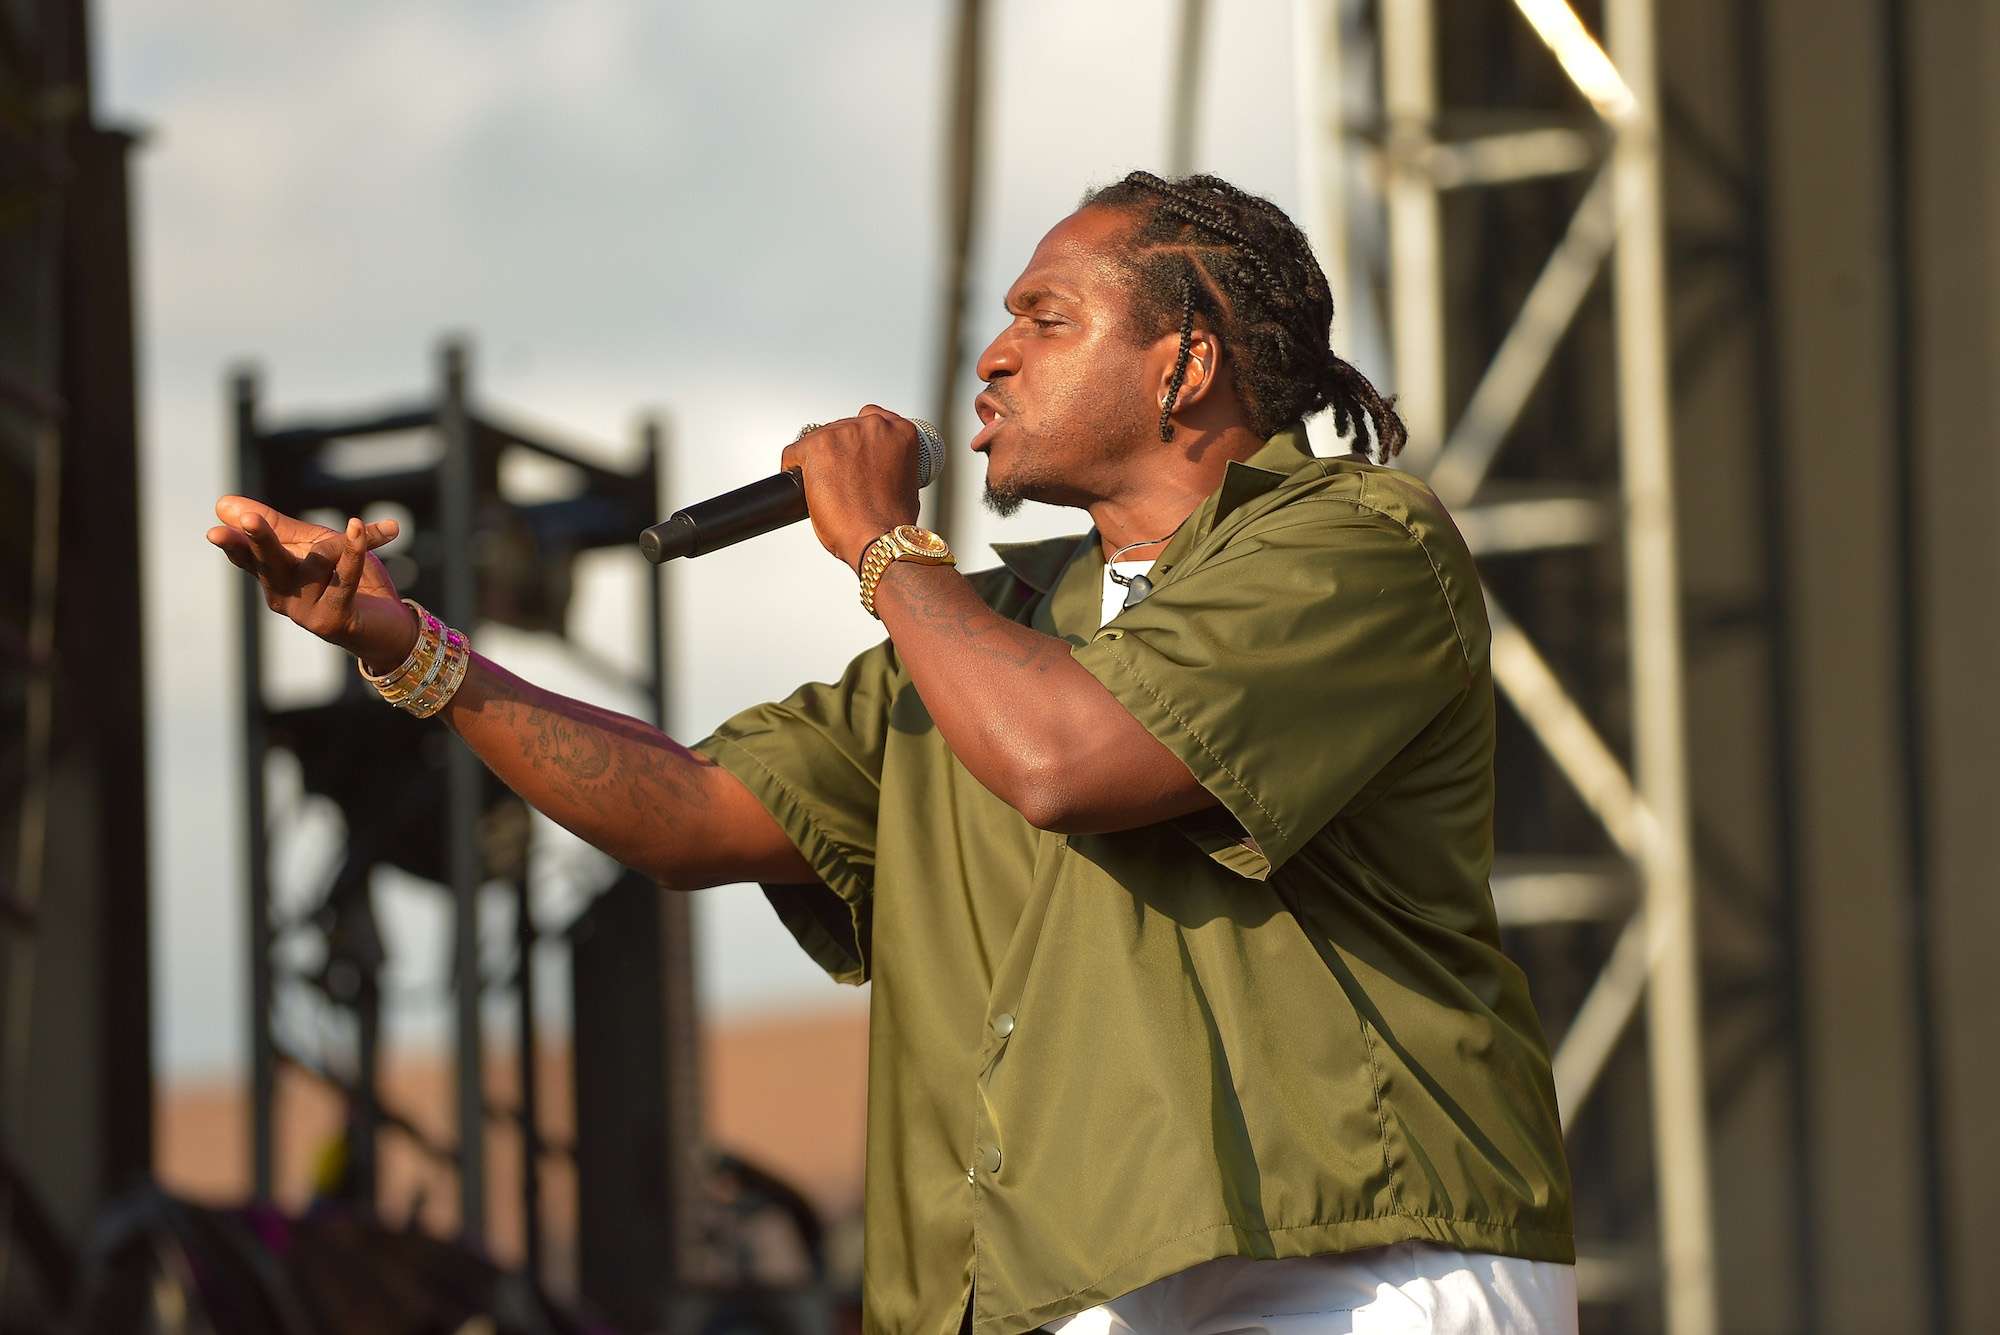 Pusha T Live at Pitchfork [GALLERY] 12